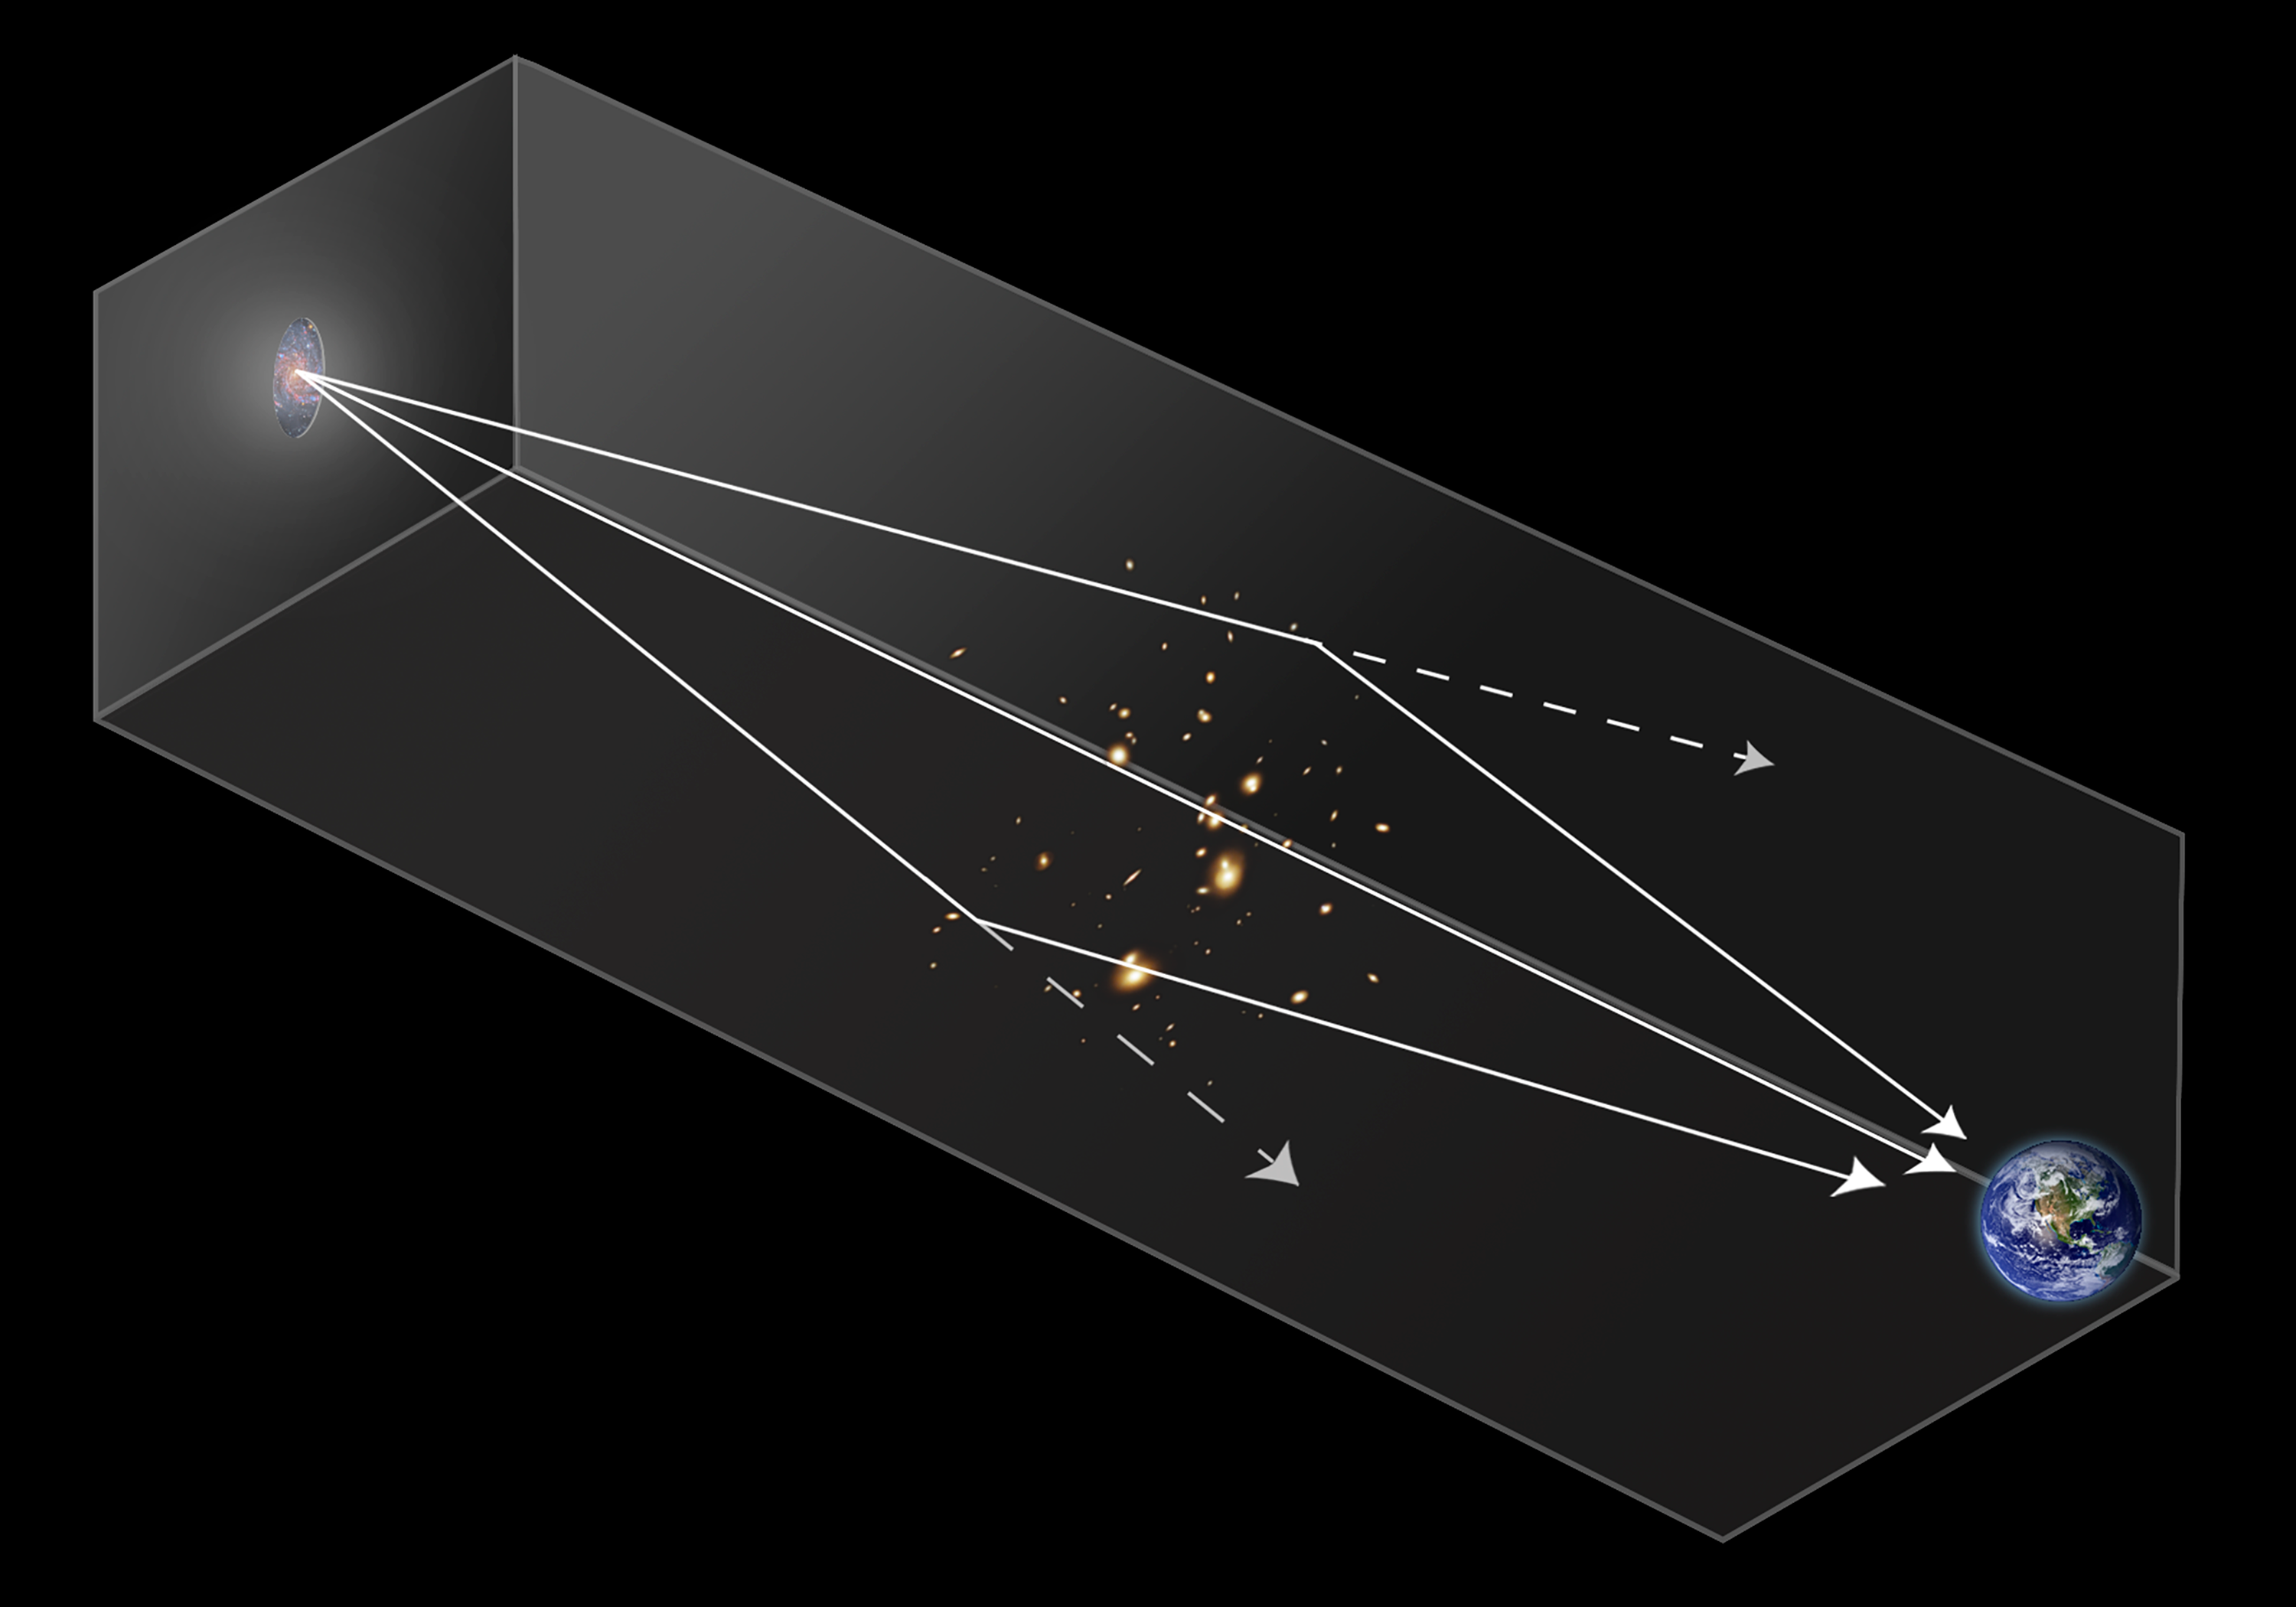 This diagram illustrates how rays of light from a distant galaxy or star can be bent by the gravity of an galaxy cluster